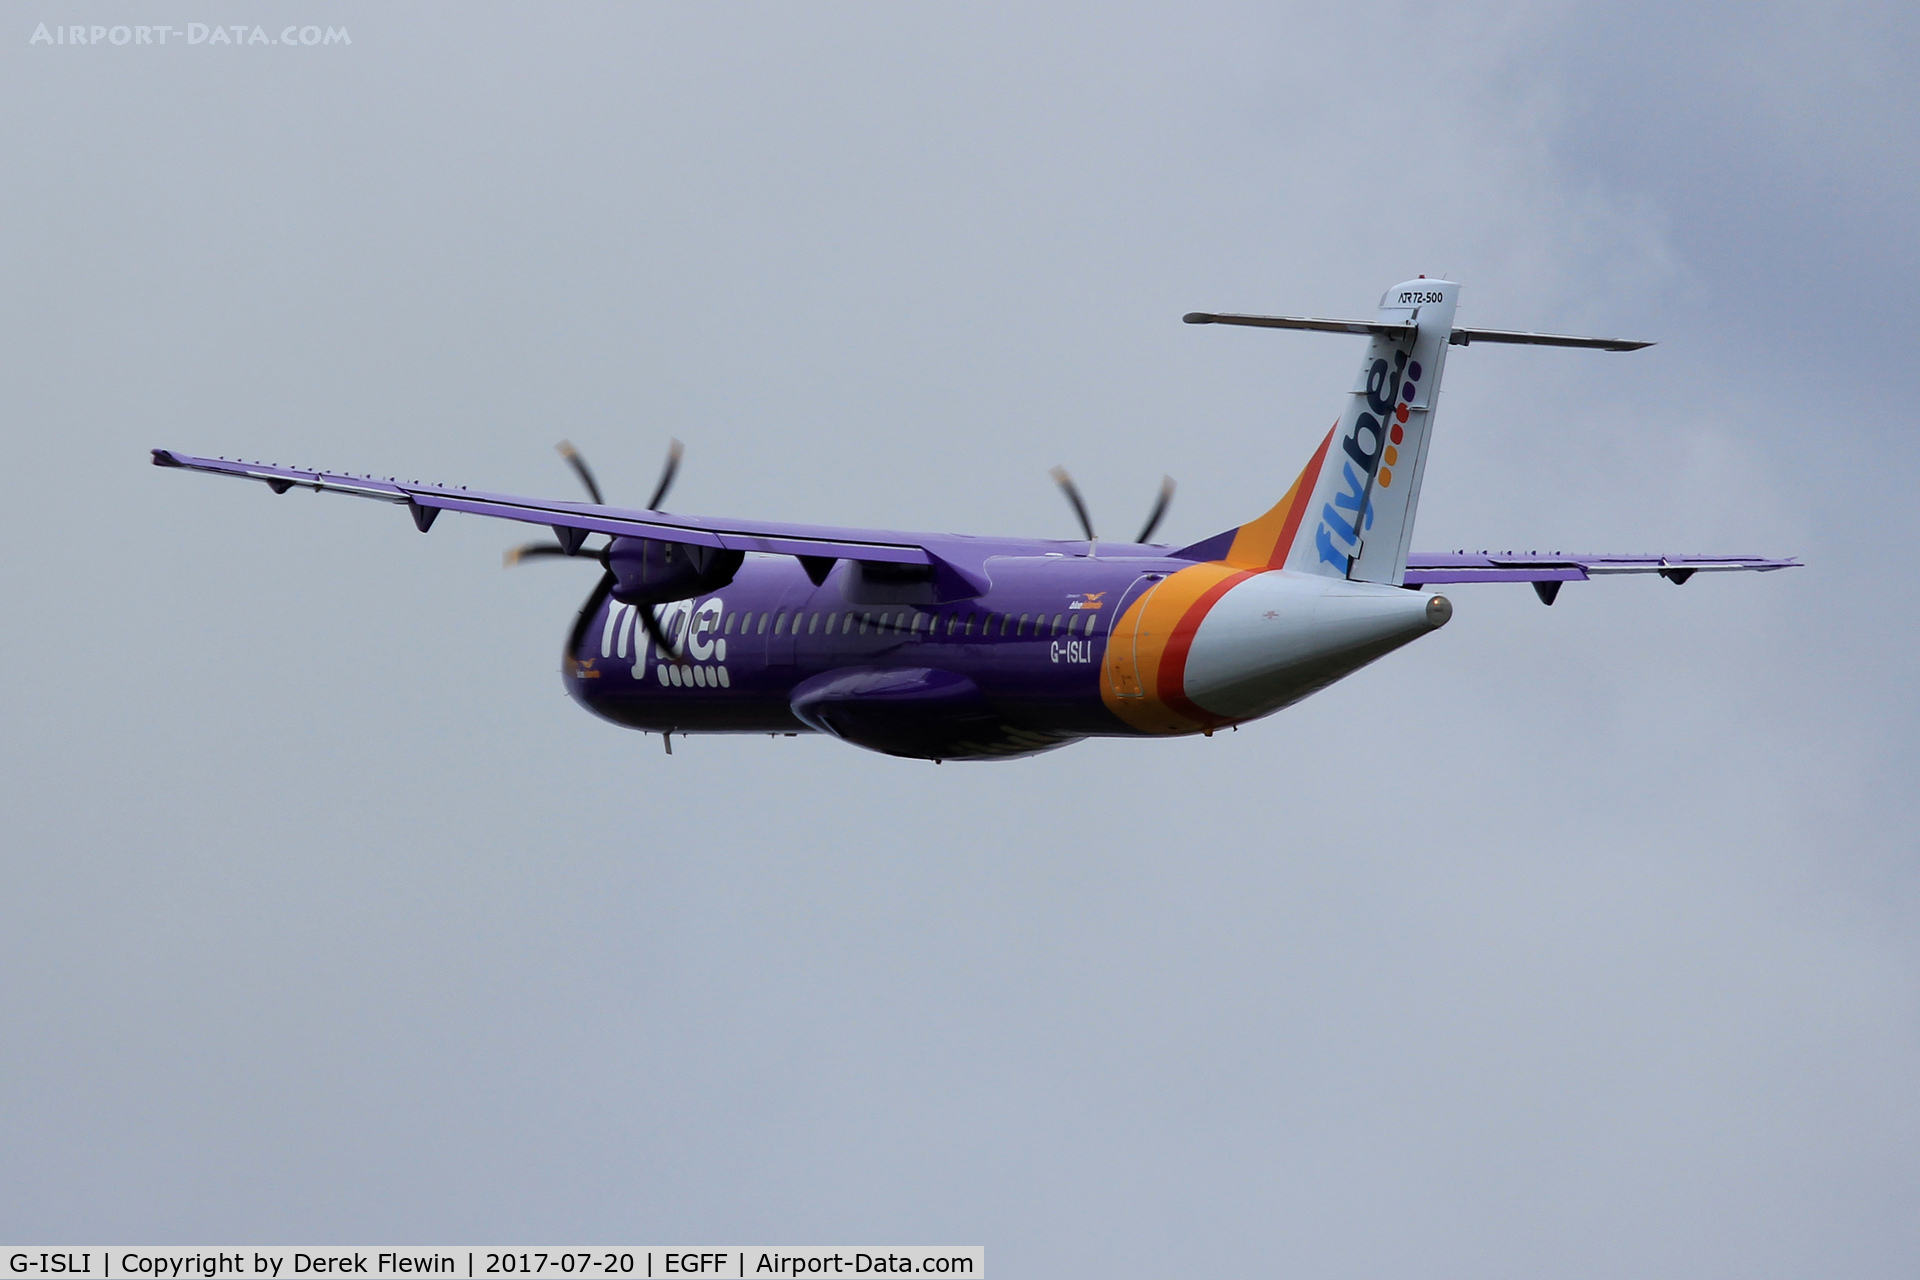 G-ISLI, 1997 ATR 72-212A C/N 529, ATR 72-212A, Flybe Jersey based, callsign Blue Island 506, previously 507LR, N529AM, OY-OLM, seen departing runway 30 en-route to Guernsey channel Isles.